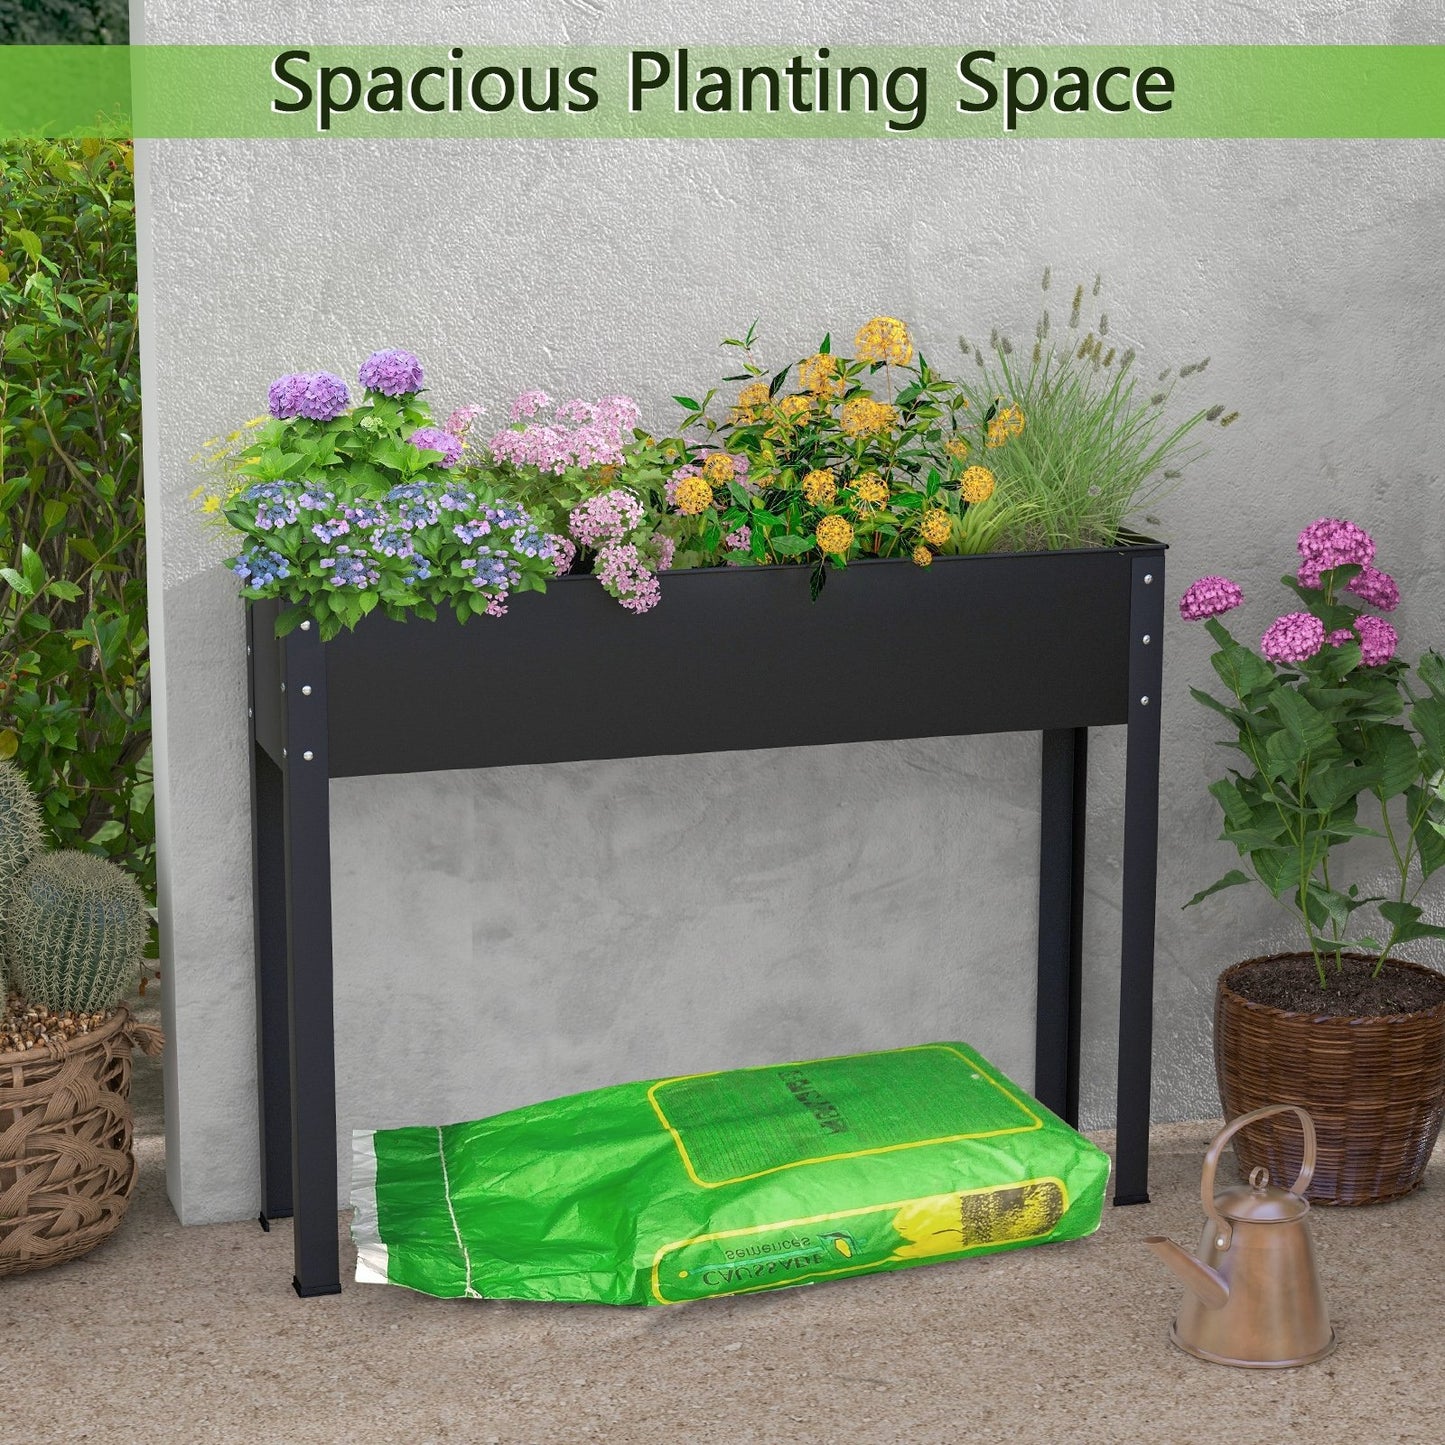 Metal Raised Garden Bed with Legs and Drainage Hole for Vegetable Flower-40 x 11 x 31.5 inches, Black